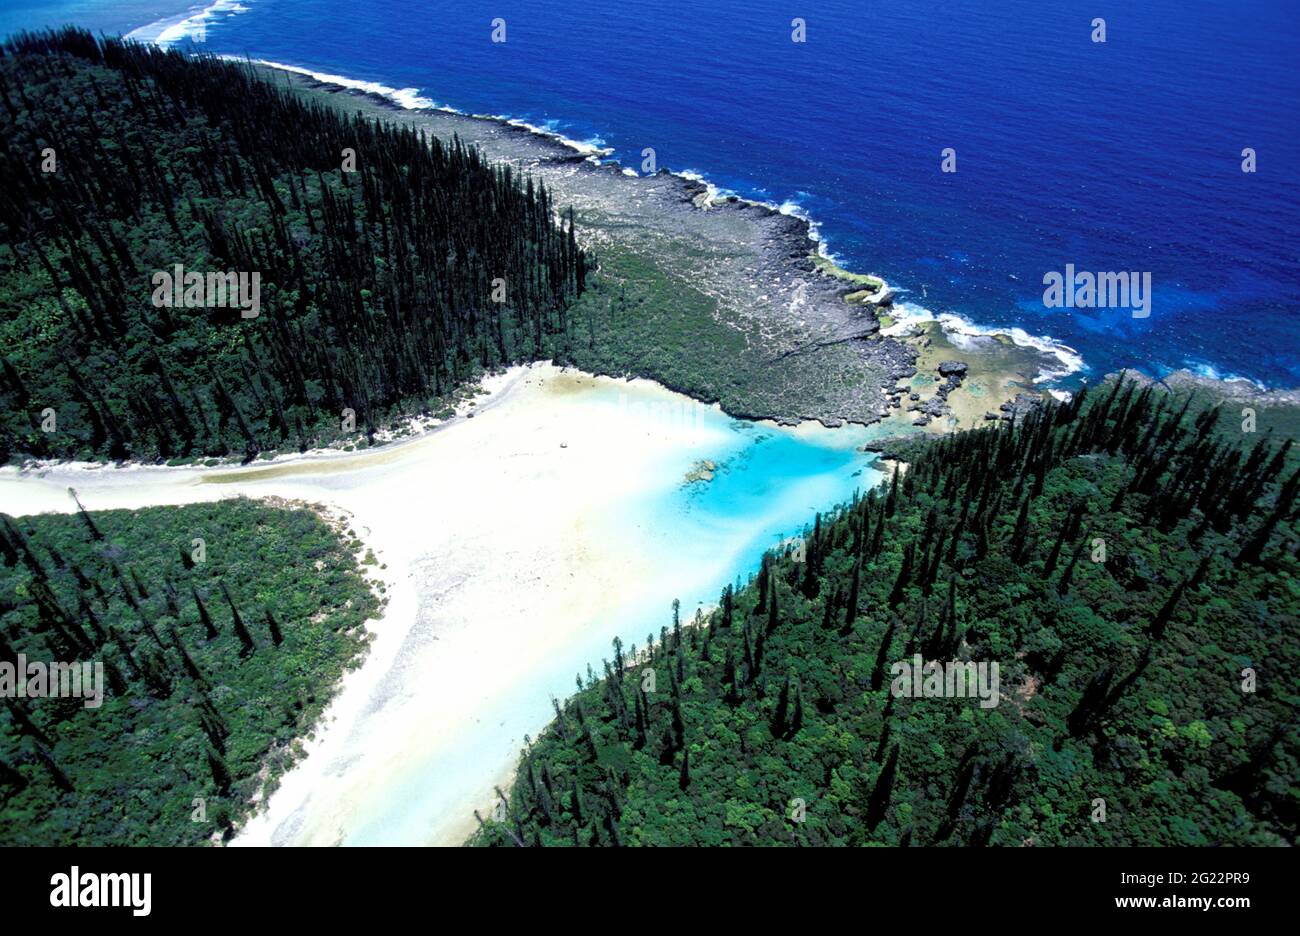 FRANCE. NEW CALEDONIA, PINE ISLAND, AERIAL VIEW OF ORO BAY Stock Photo